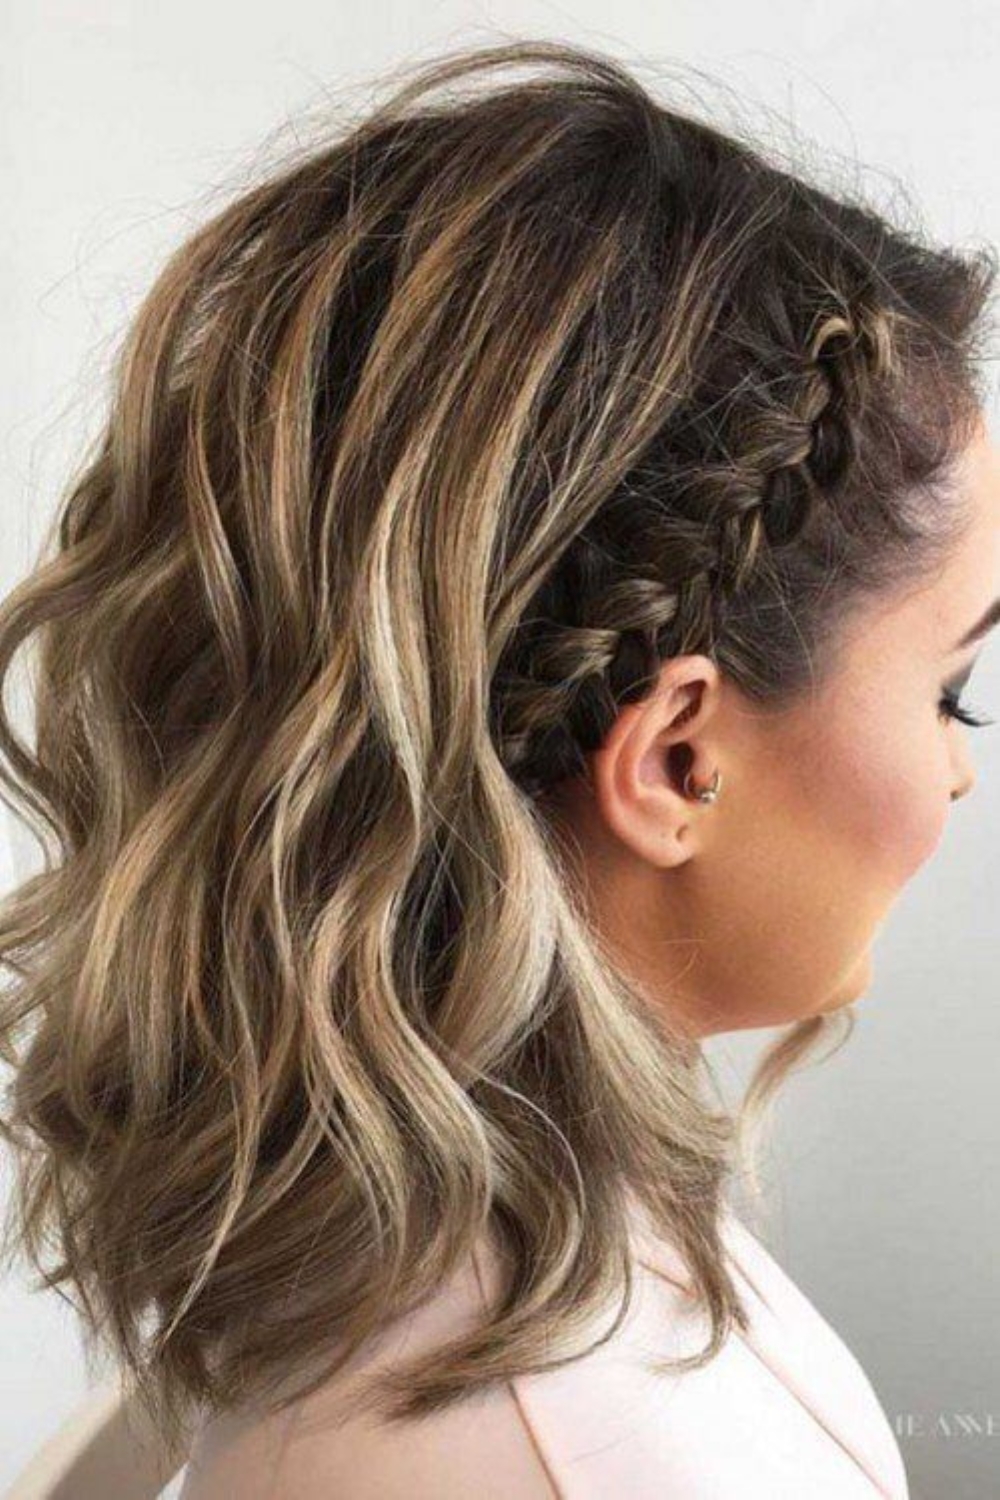 One sided braid short music festival hairstyle